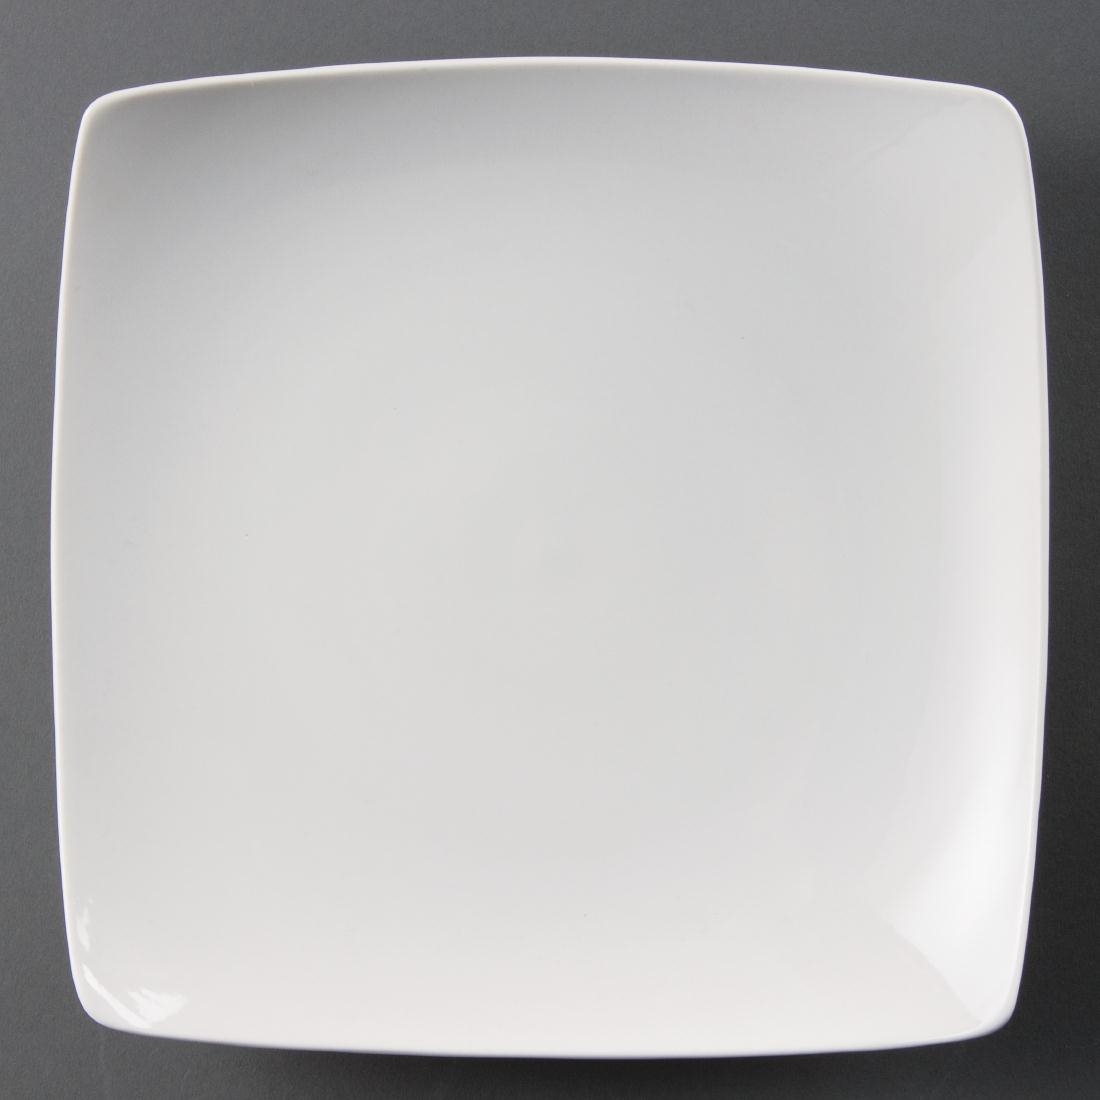 Olympia Whiteware Square Bowled Plates 250mm